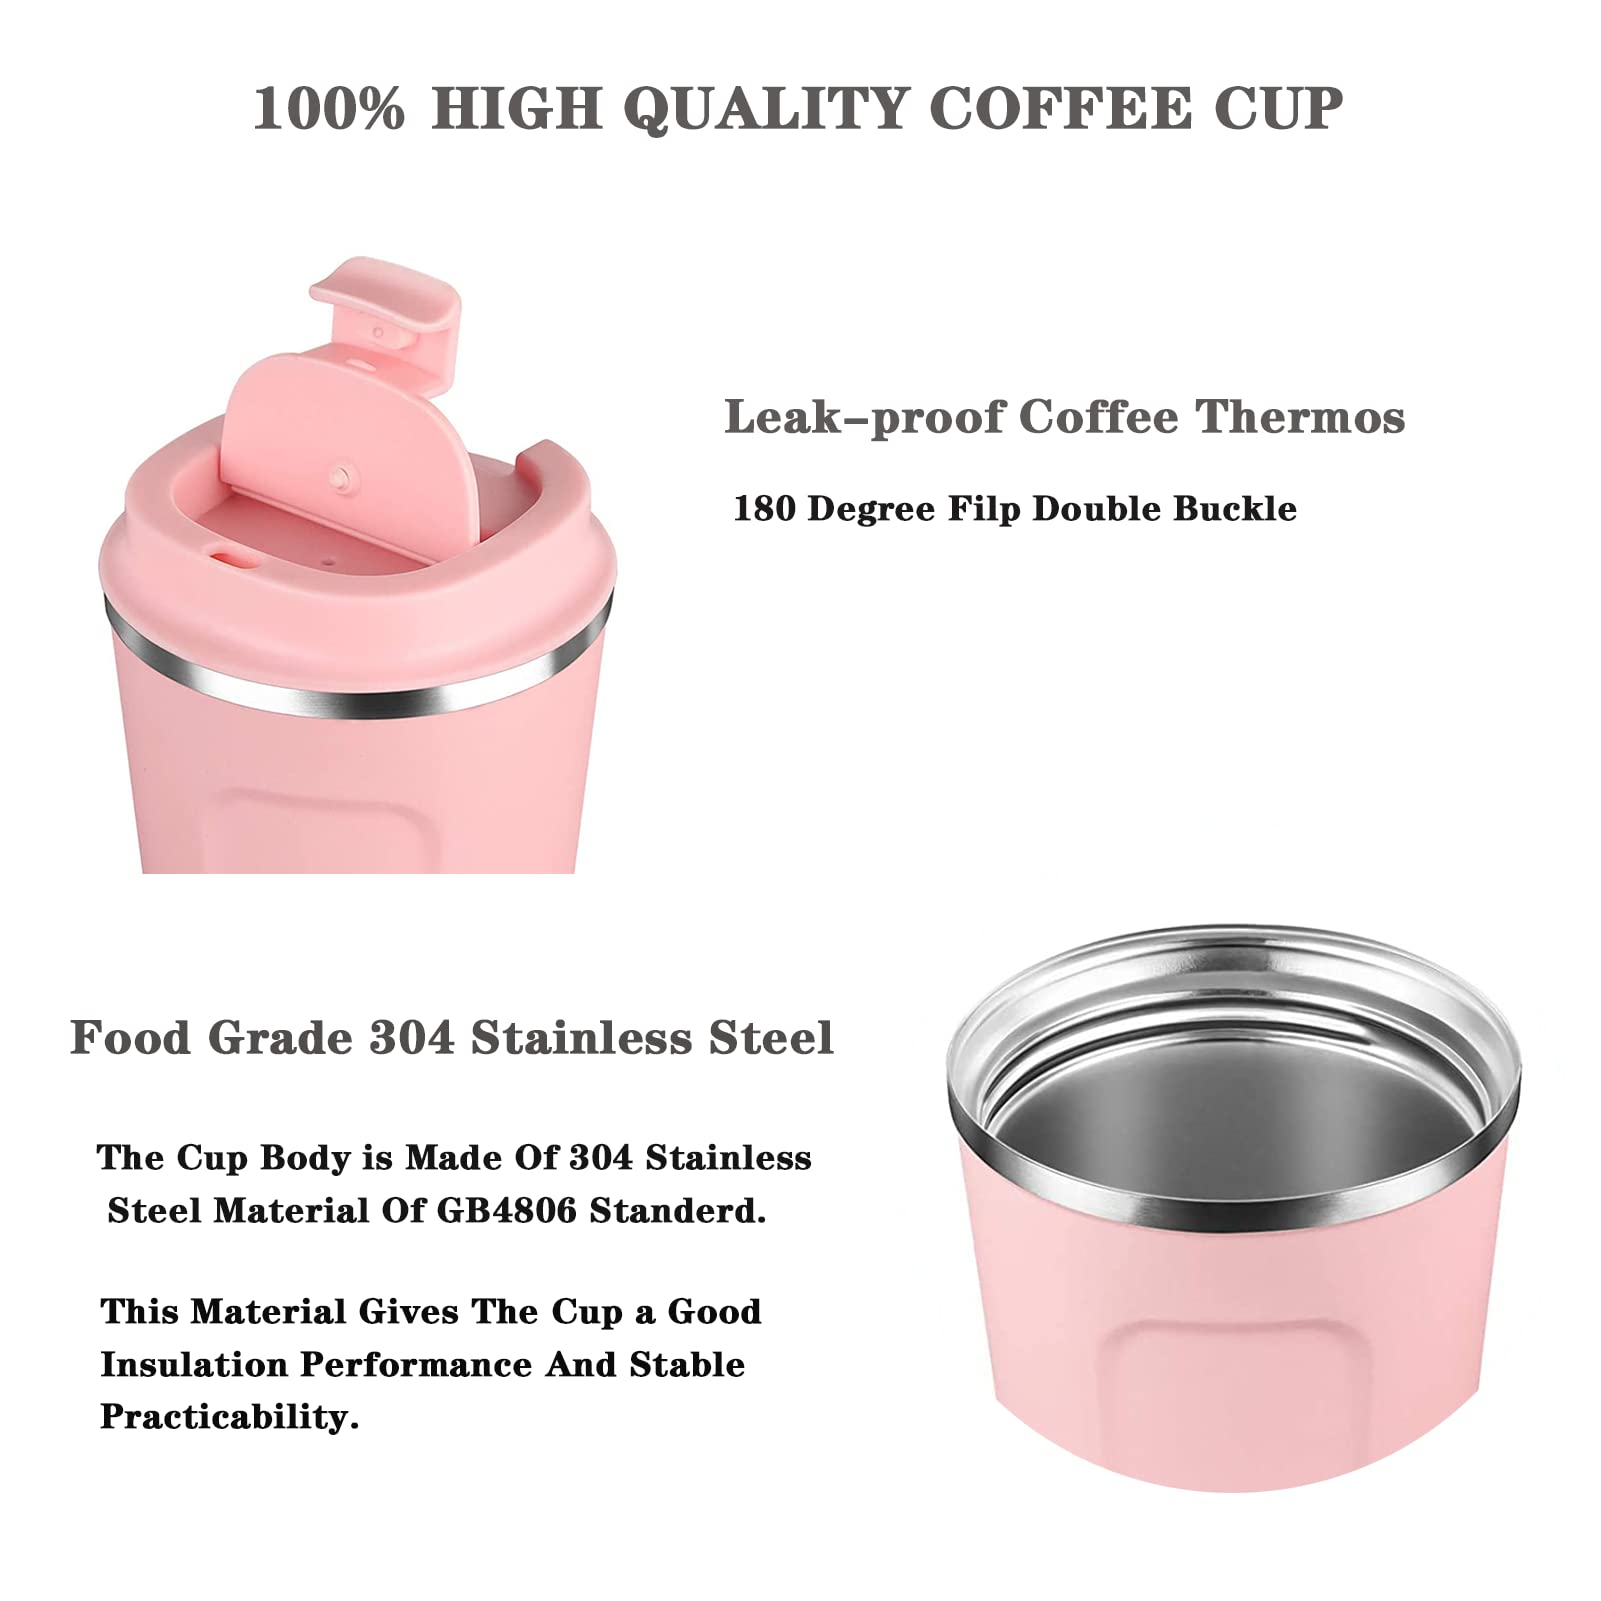 Insulated Coffee Mug with Lid, 18oz Vacuum Stainless Steel Tea Tumbler Cup, Durable Double Wall Leak-Proof Reusable Coffee Cup Thermos Mug for Travel Office School Party Camping (Pink)